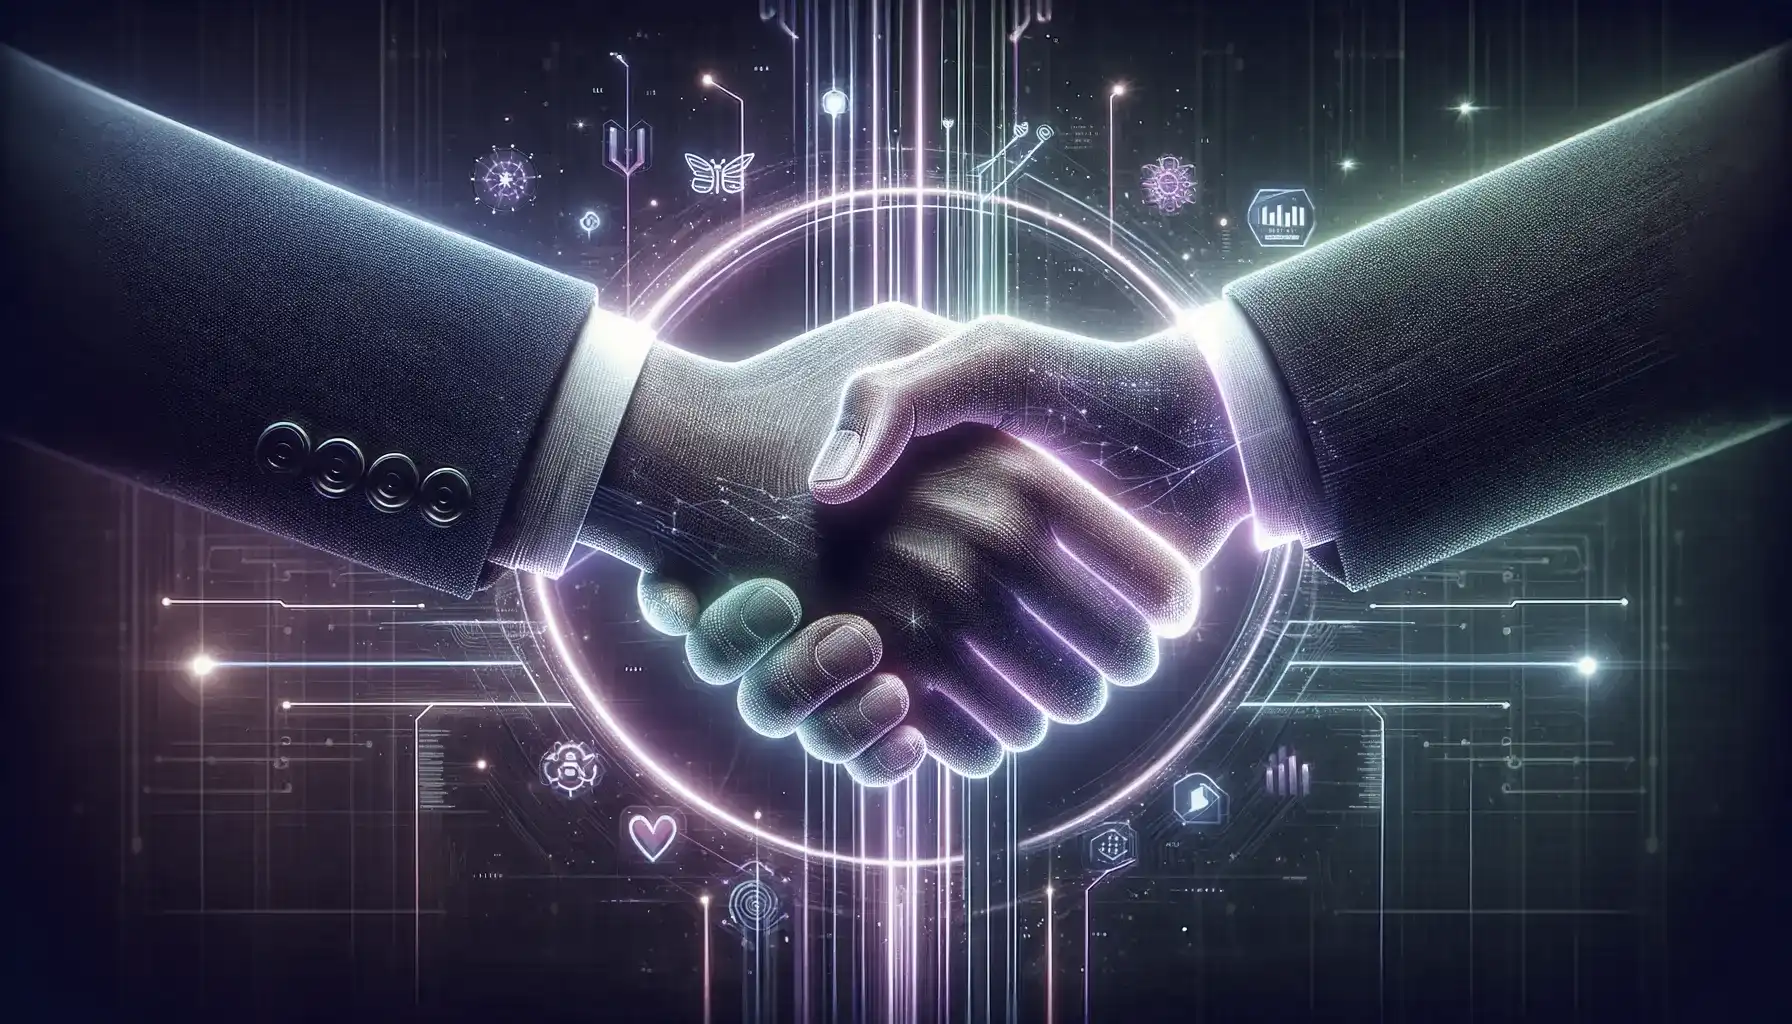 A 16x9 image highlighting the concept of partnership in enterprise application development. At the center, two hands are depicted in a handshake, illuminated by striking purple and green neon lights, symbolizing strong collaboration and unity. Surrounding this central image are subtle elements of digital code and interconnected lines, representing the integration of technology and shared objectives in business. The overall visual conveys a sense of mutual success and unity in digital transformations, captured in a clean and modern style